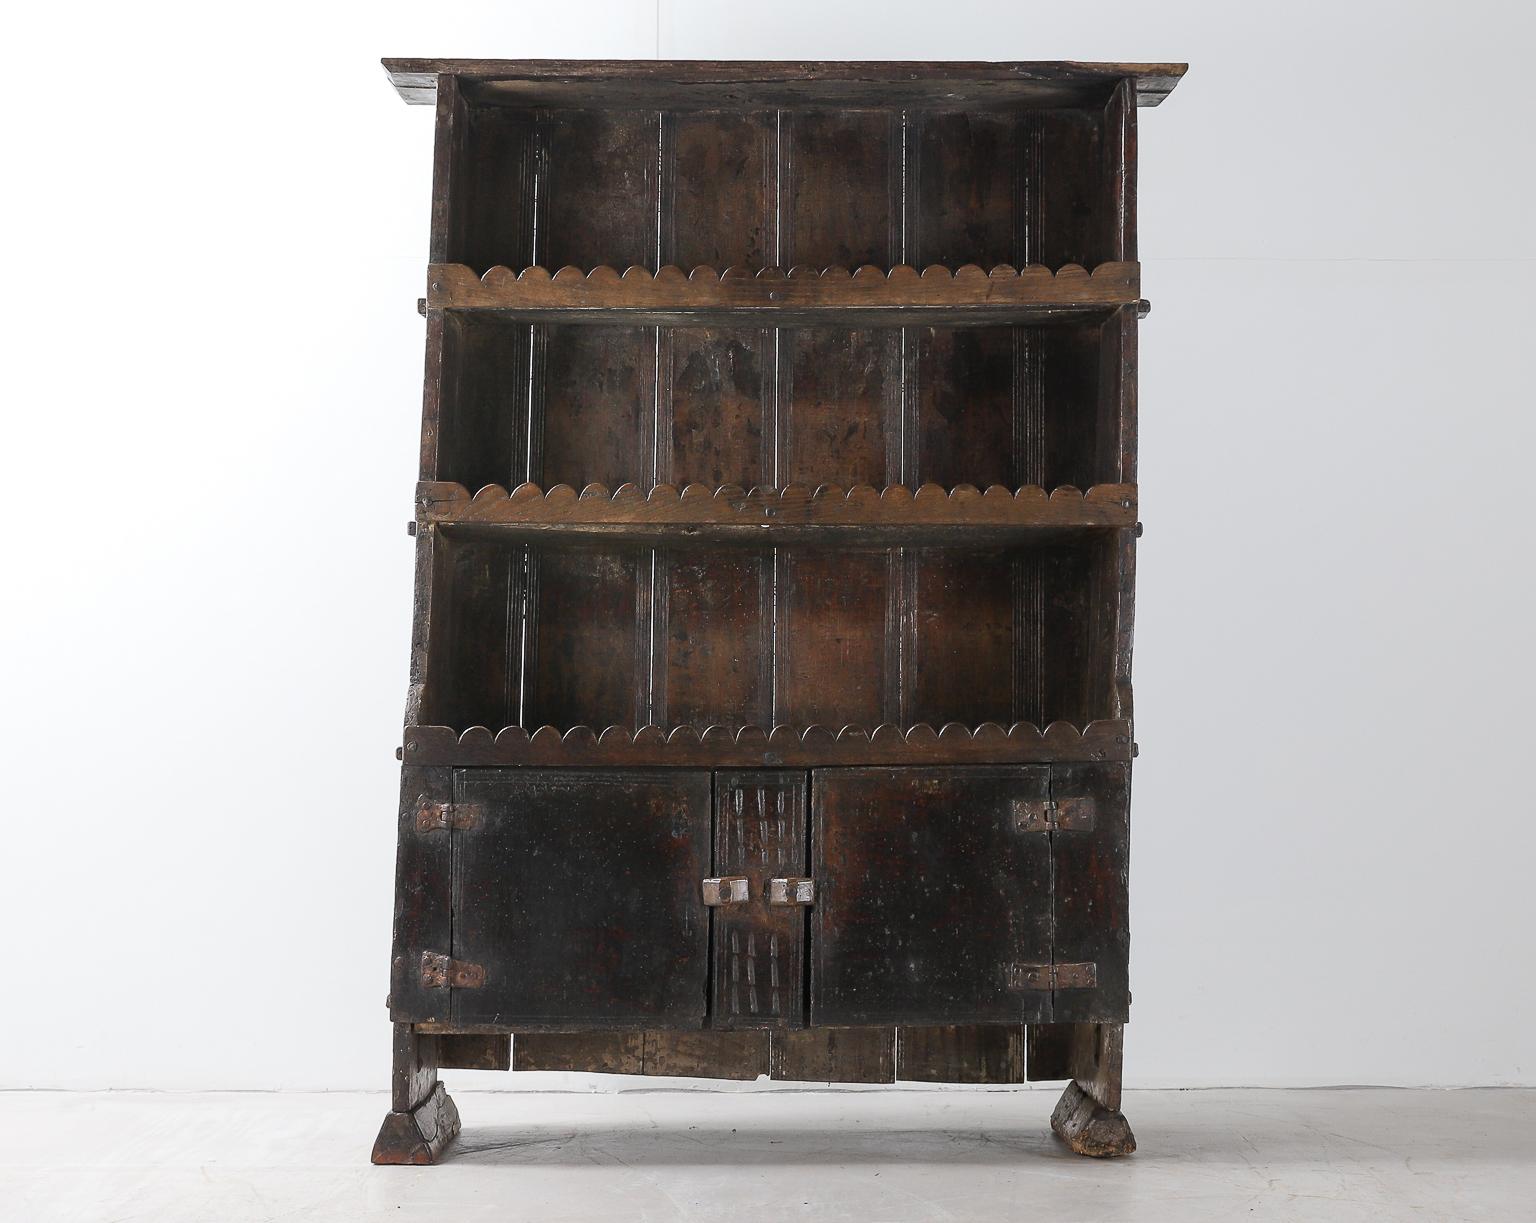 18th Century Spanish open oak dresser with hand carved plank backboard, scallop shelf fronts and two cabinet doors below which allow more discreet storage.

Recently restored, the piece is in good condition consistent with age and structurally